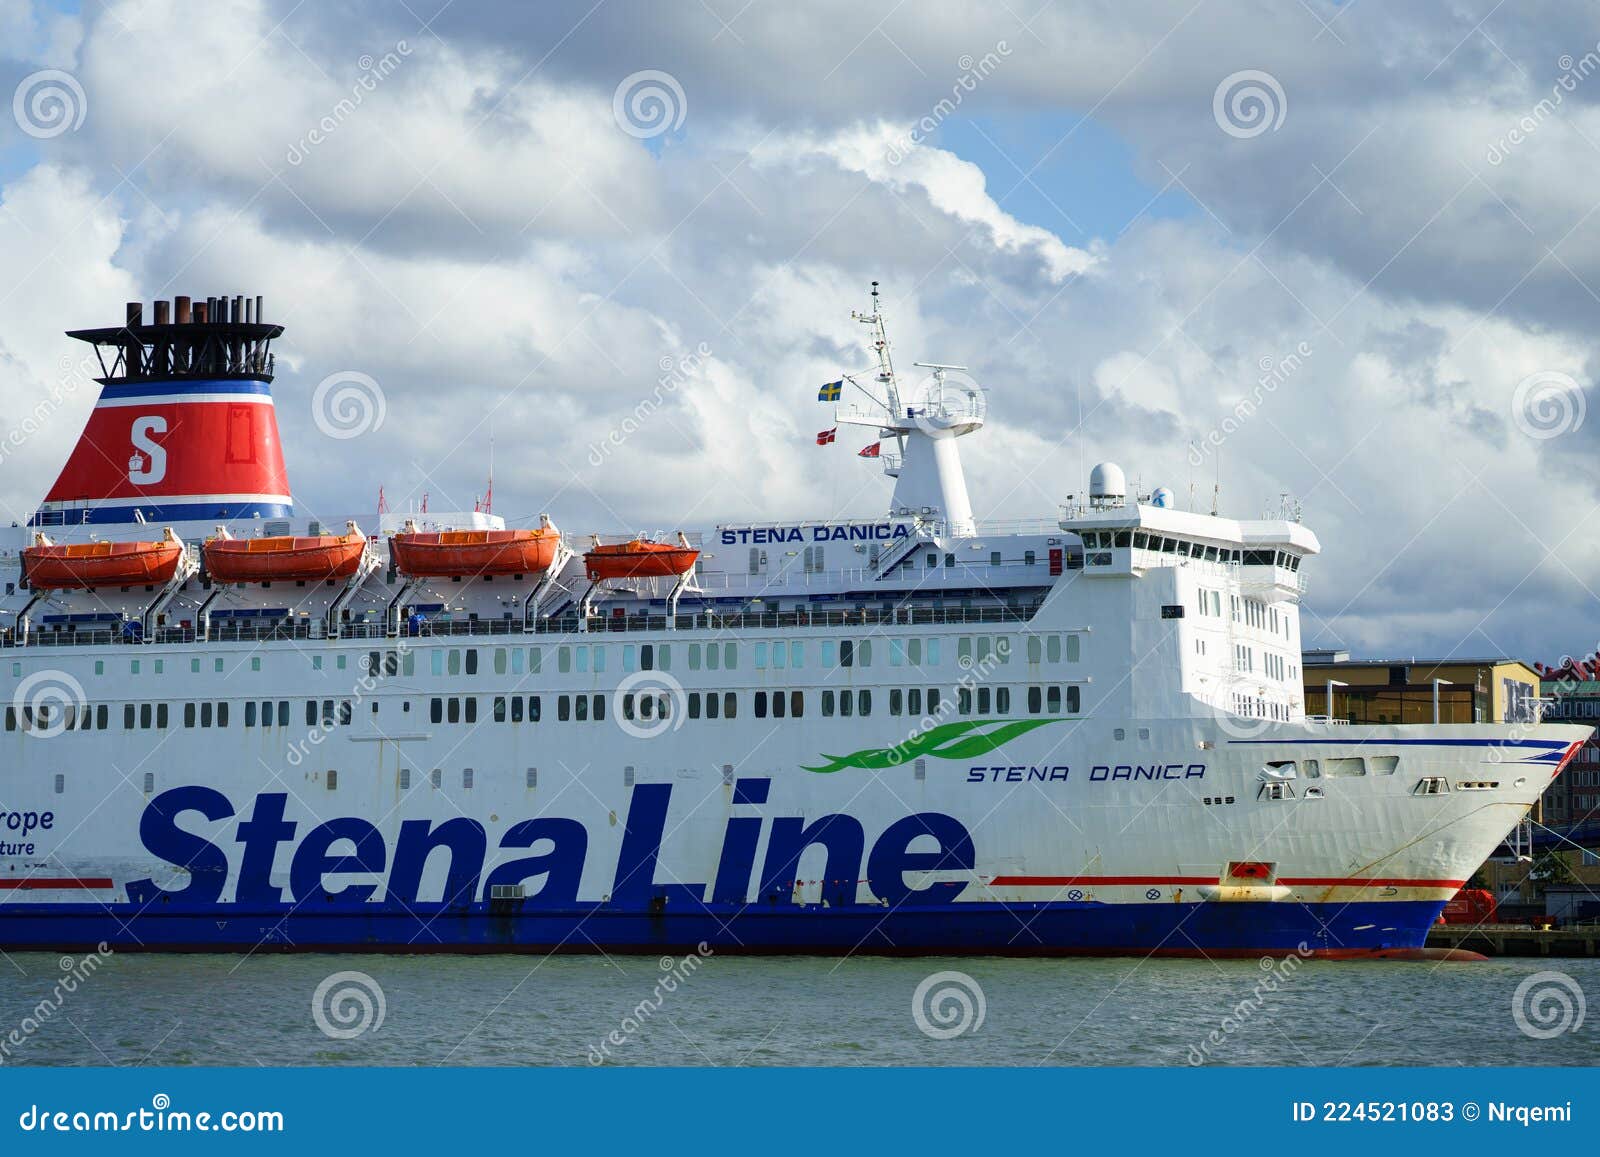 473 Stena Line Photos - Free & Stock Photos from Dreamstime